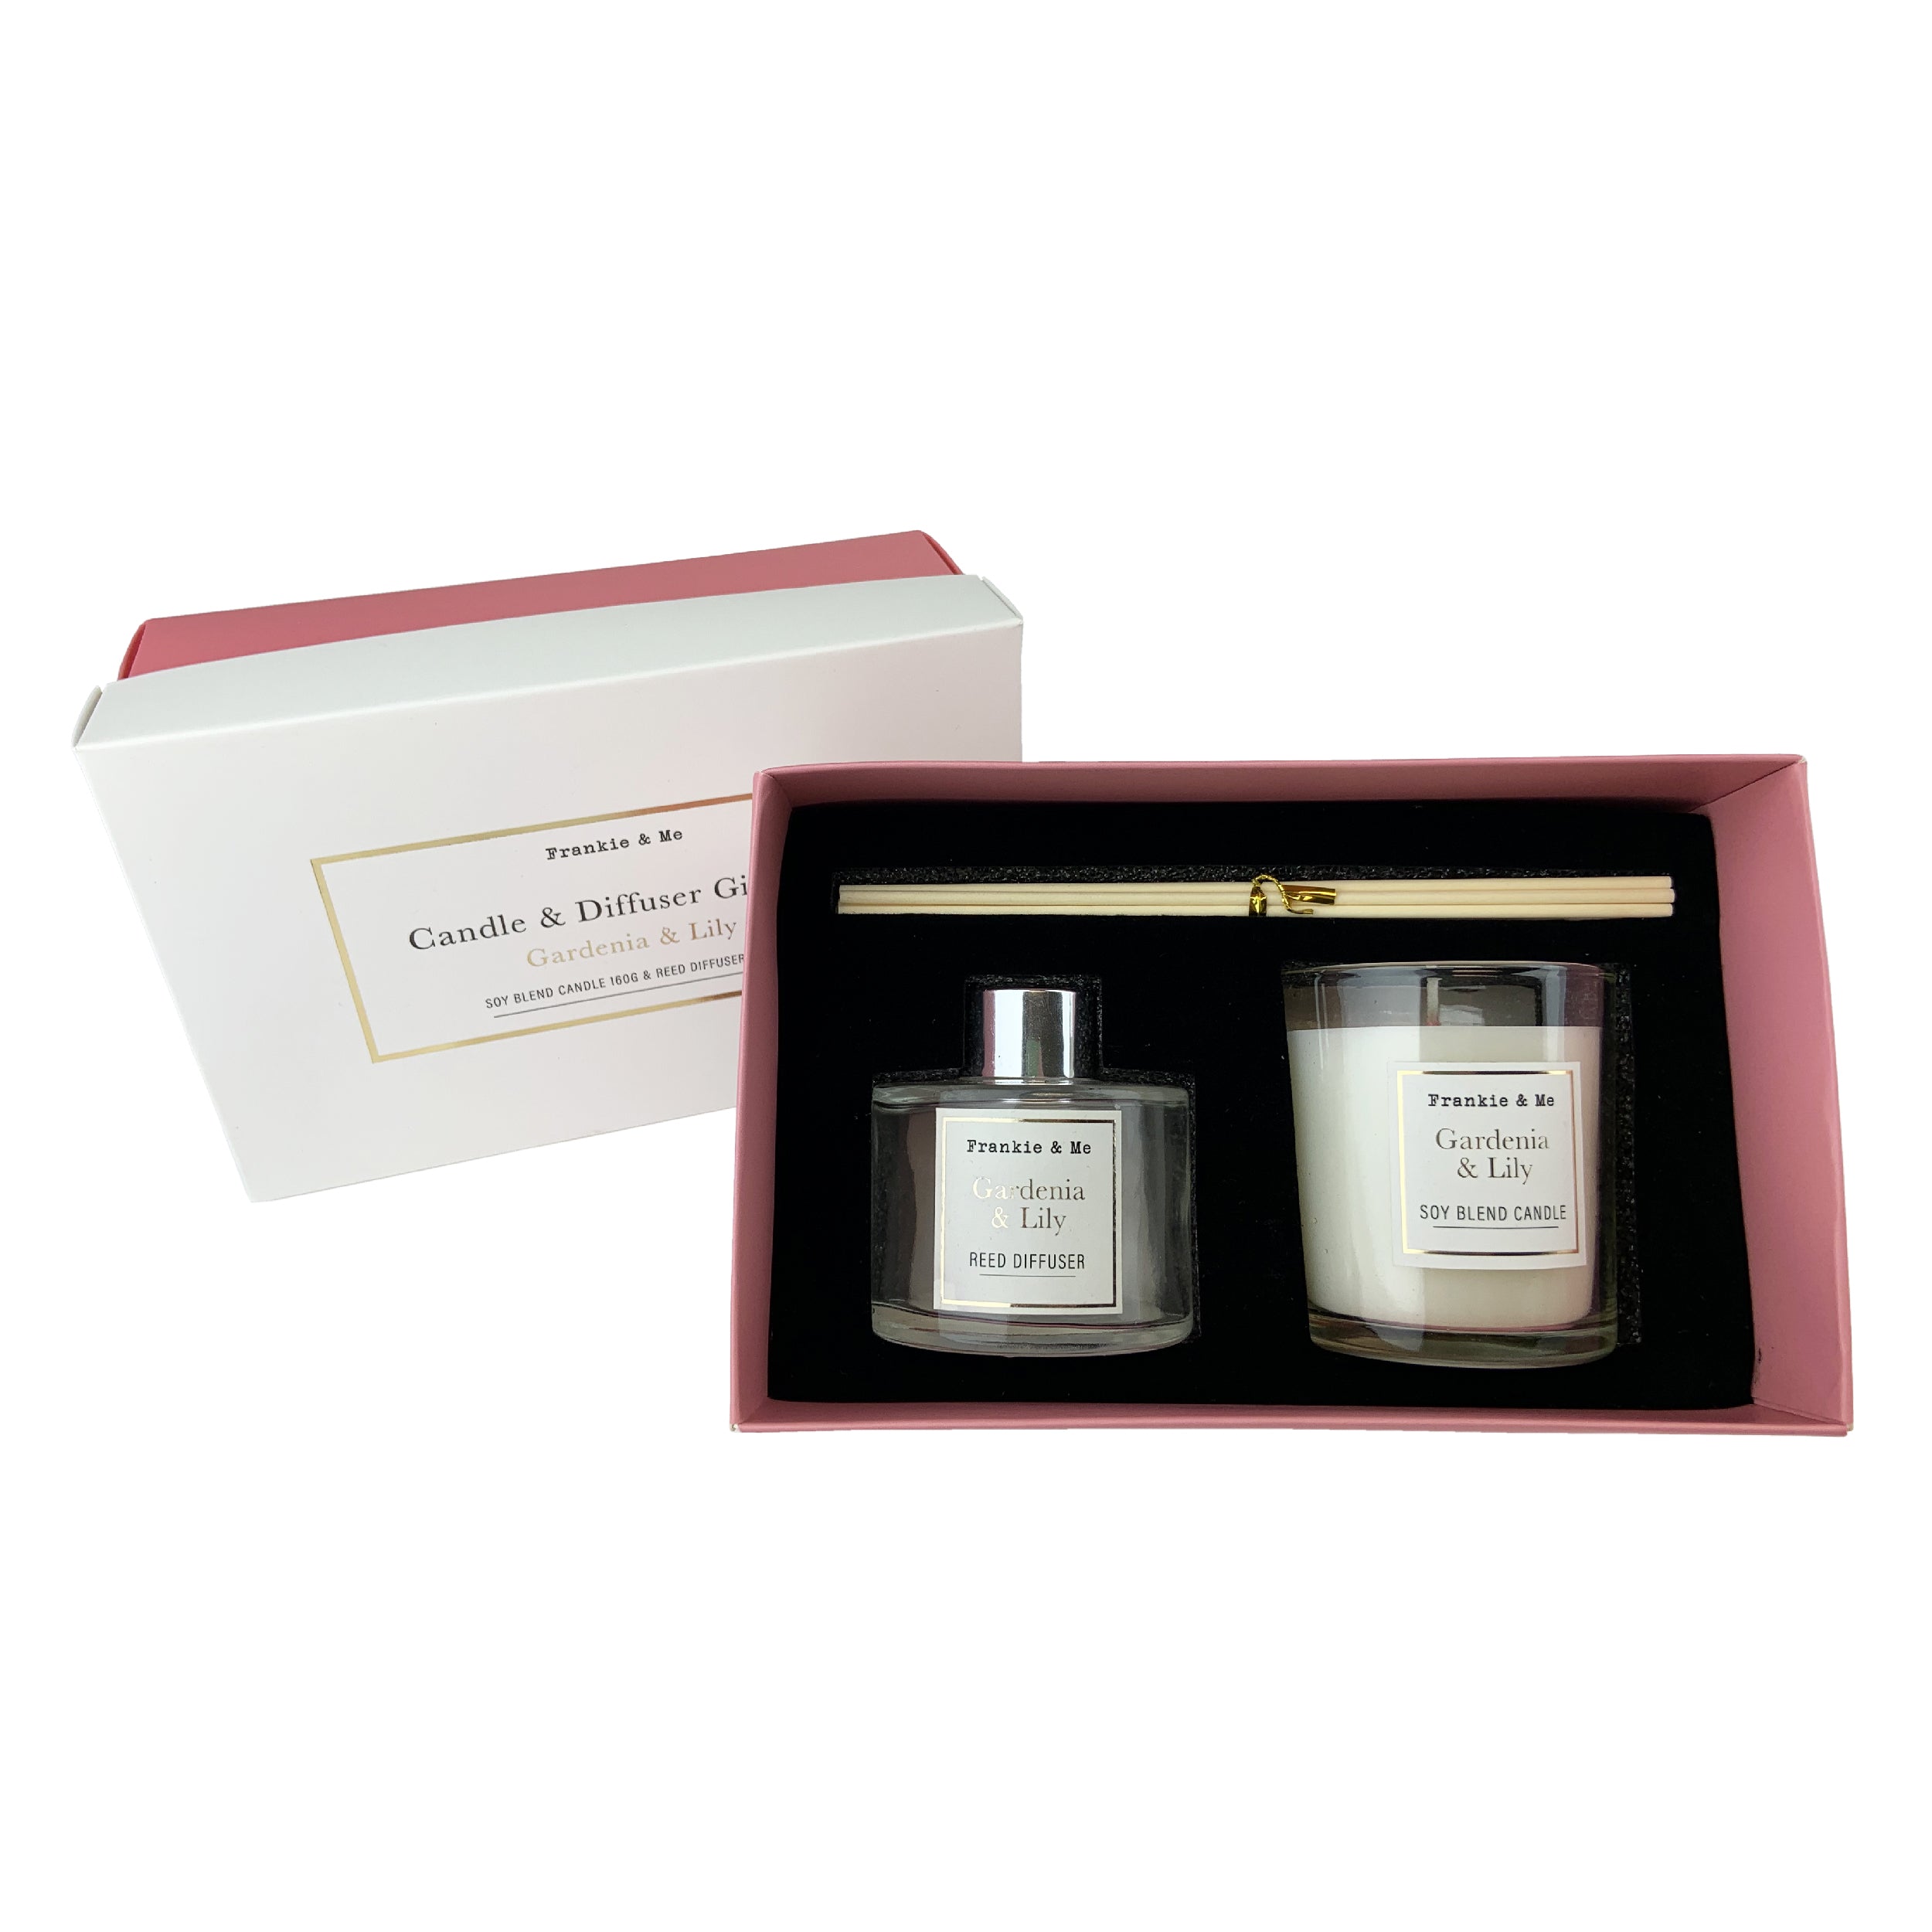 Candle & Diffuser Gift Set - Gardenia & Lily - Dollars and Sense